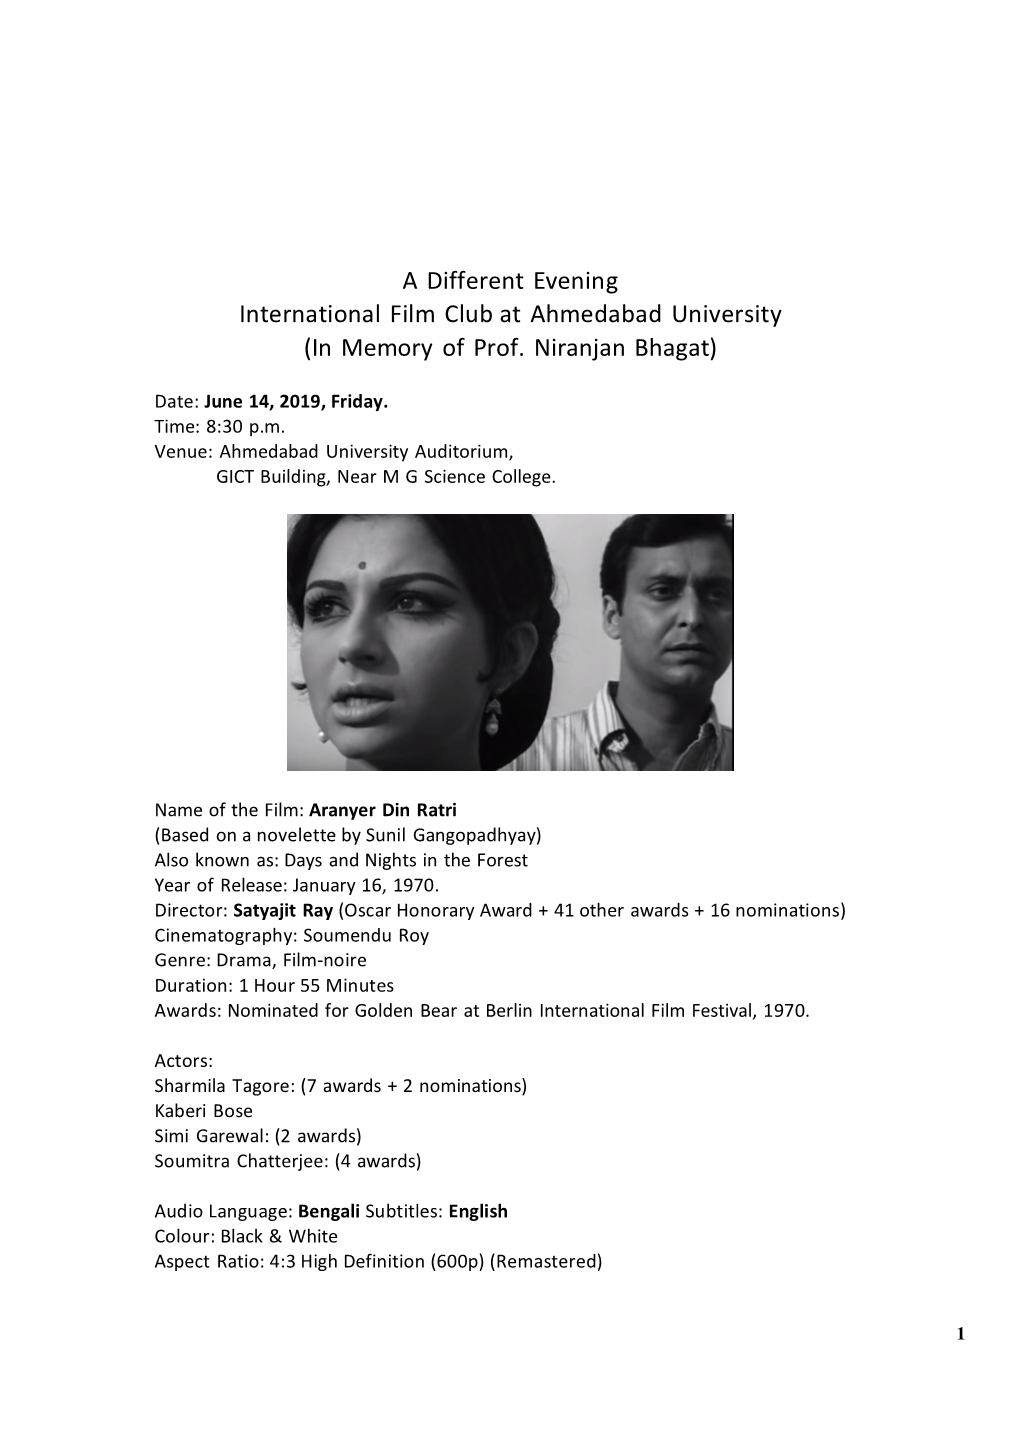 A Different Evening International Film Club at Ahmedabad University (In Memory of Prof